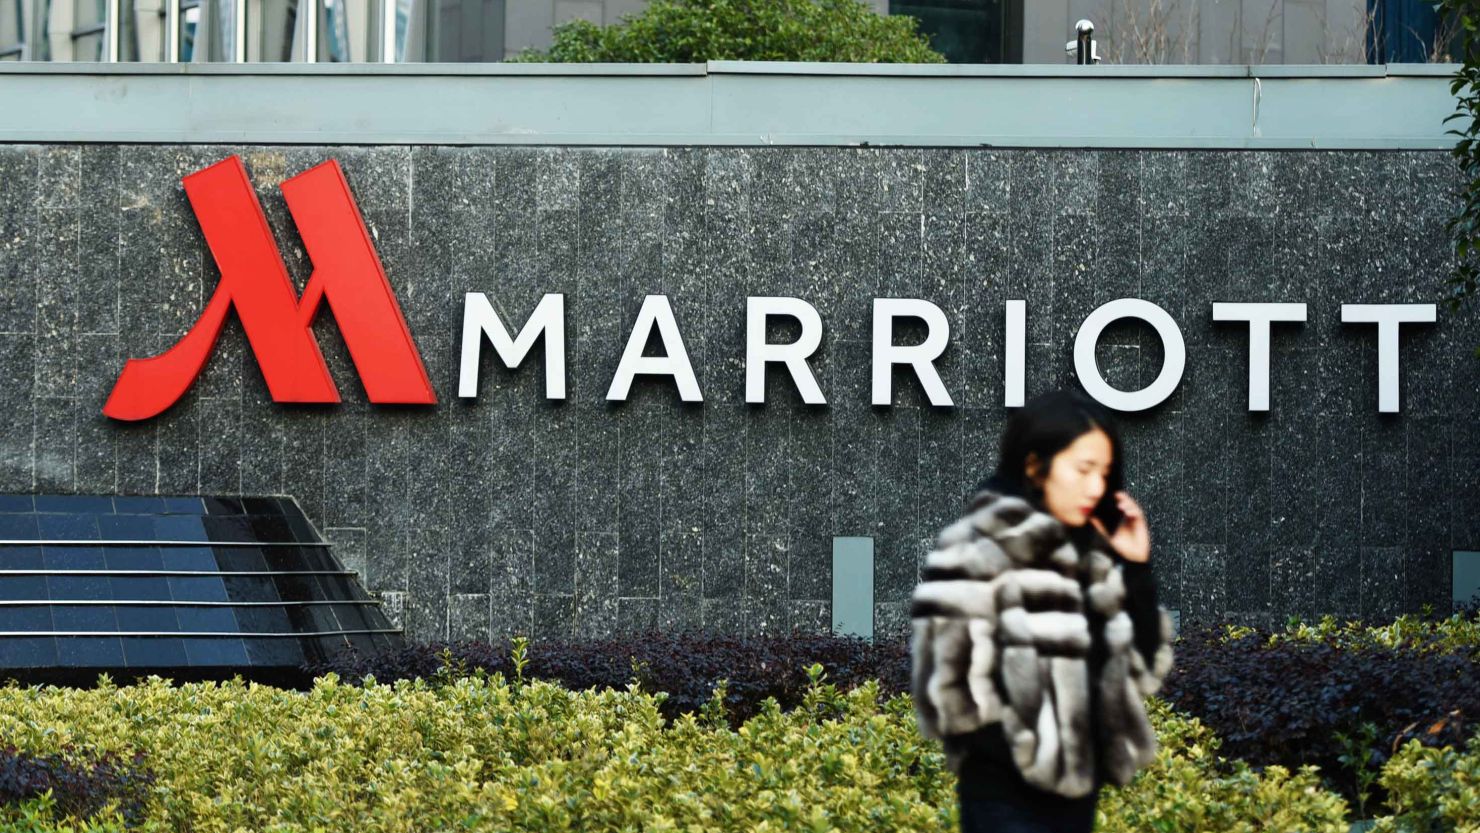 A Marriott property in Hangzhou. China, the strongest growth driver for the company's international business, is a key part of its expansion plan this year.